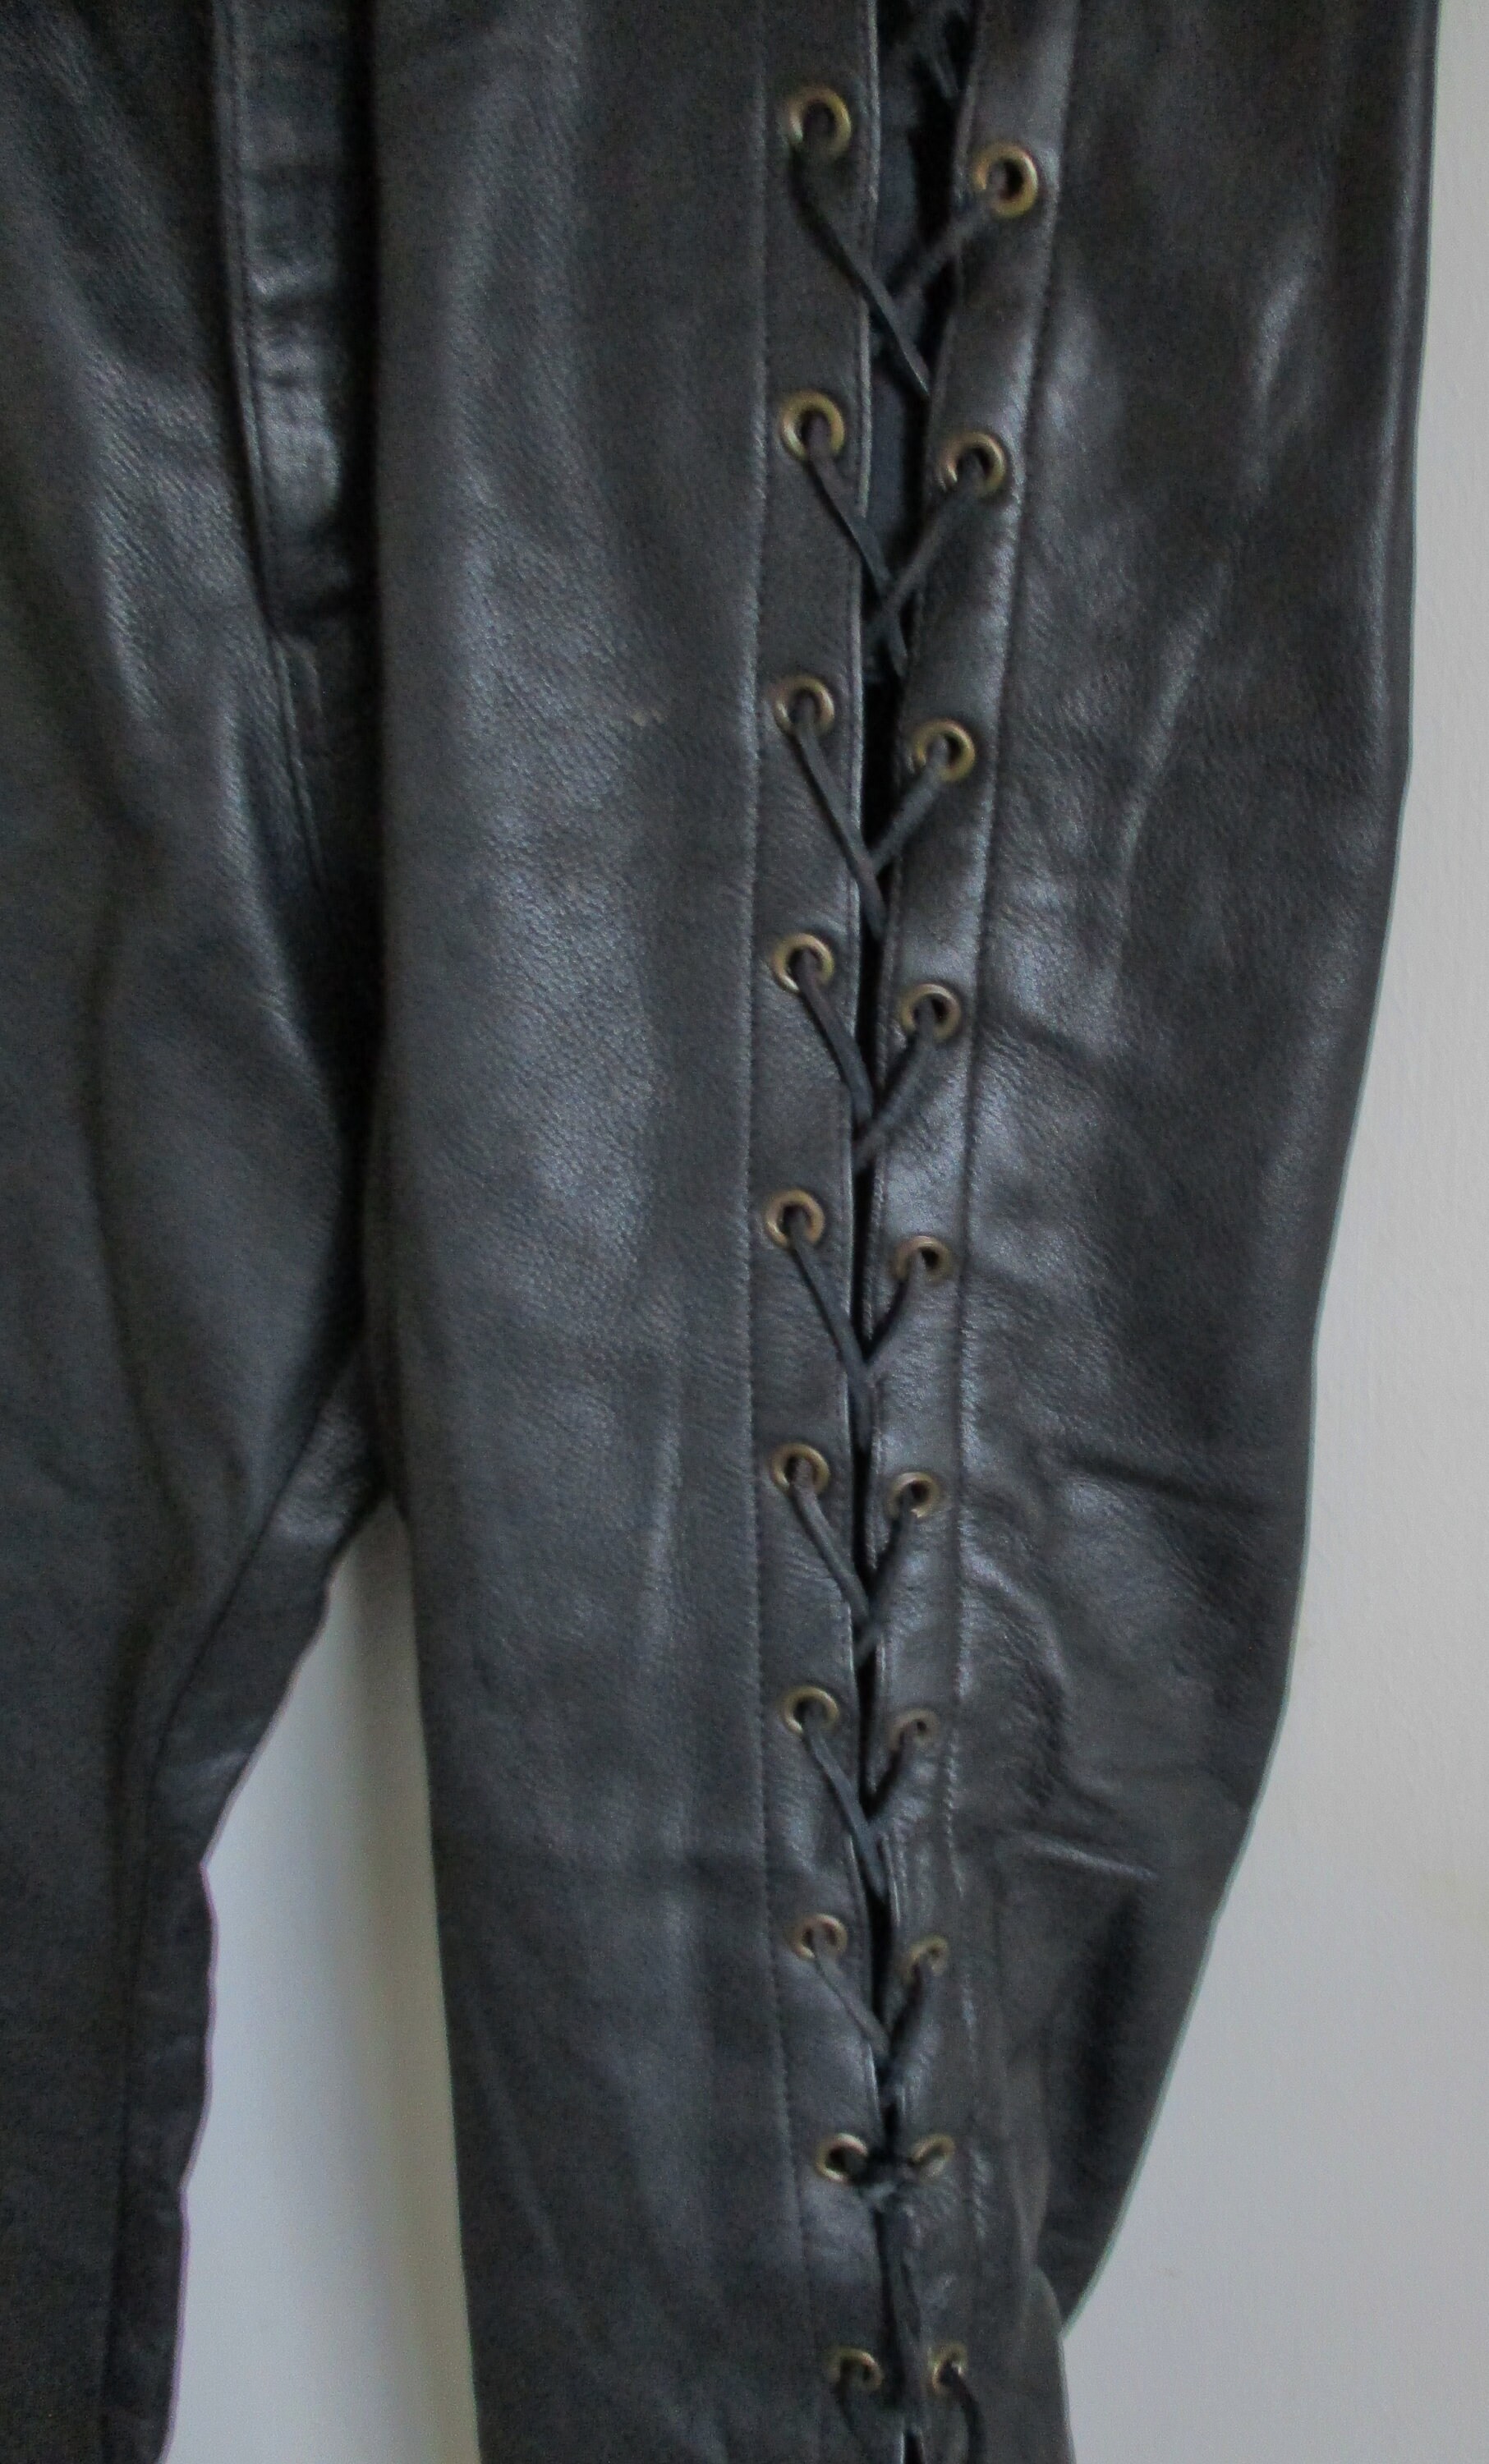 Vintage Interstate Leather Lace Outer Legs Black Leather Pants - Etsy